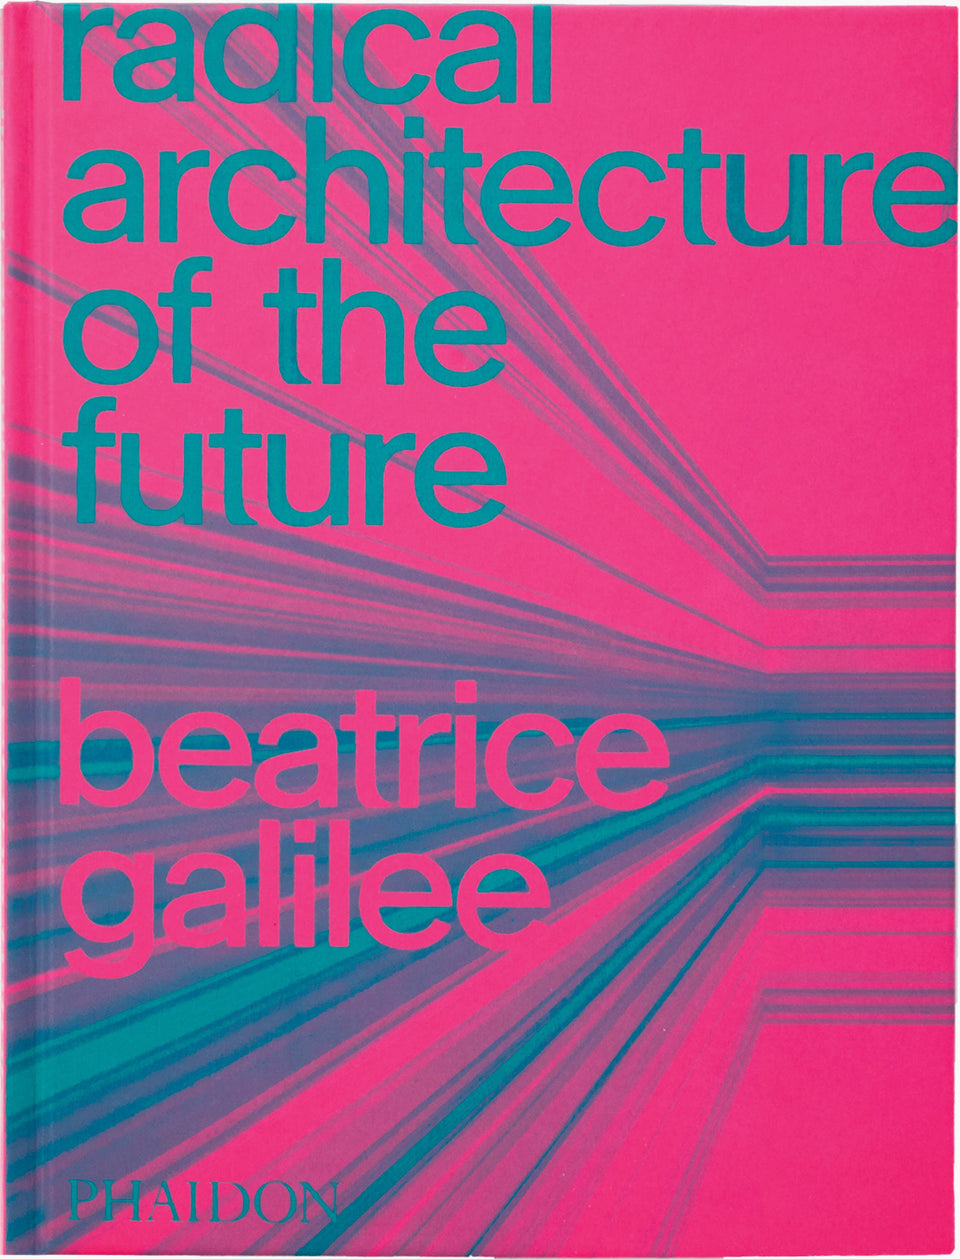 Radical Architecture of the Future - W-DWR_2549055_100348498_radical_architecture_of_the_future_f